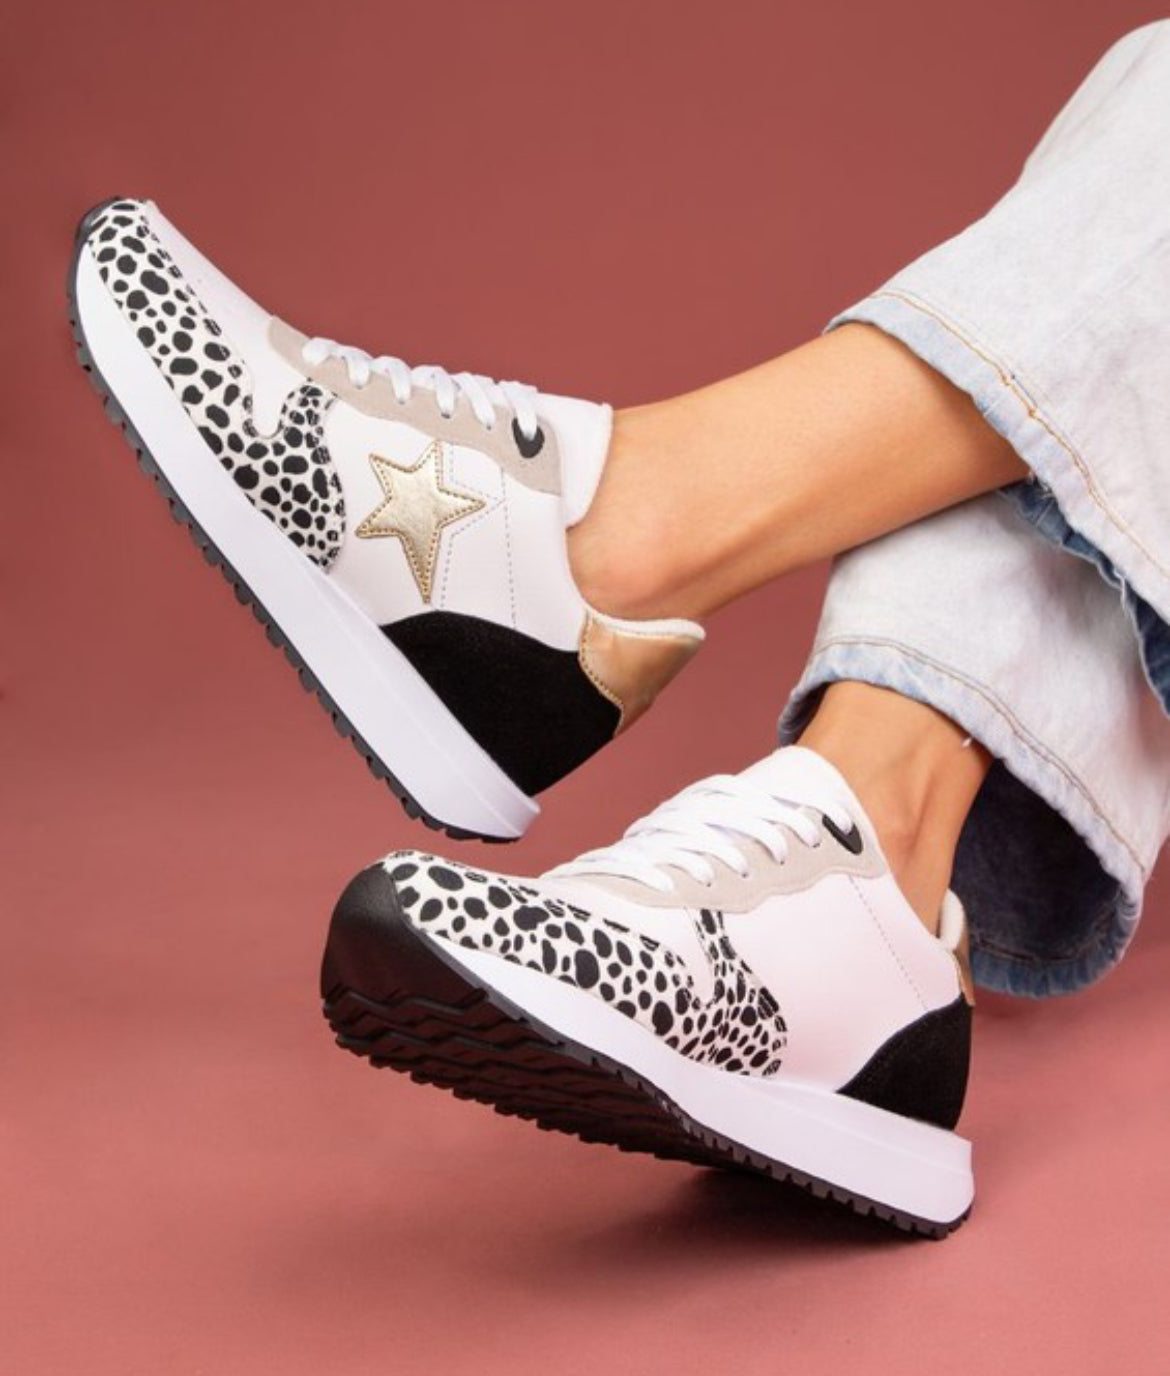 V Sneakers - Spotted Cheetah